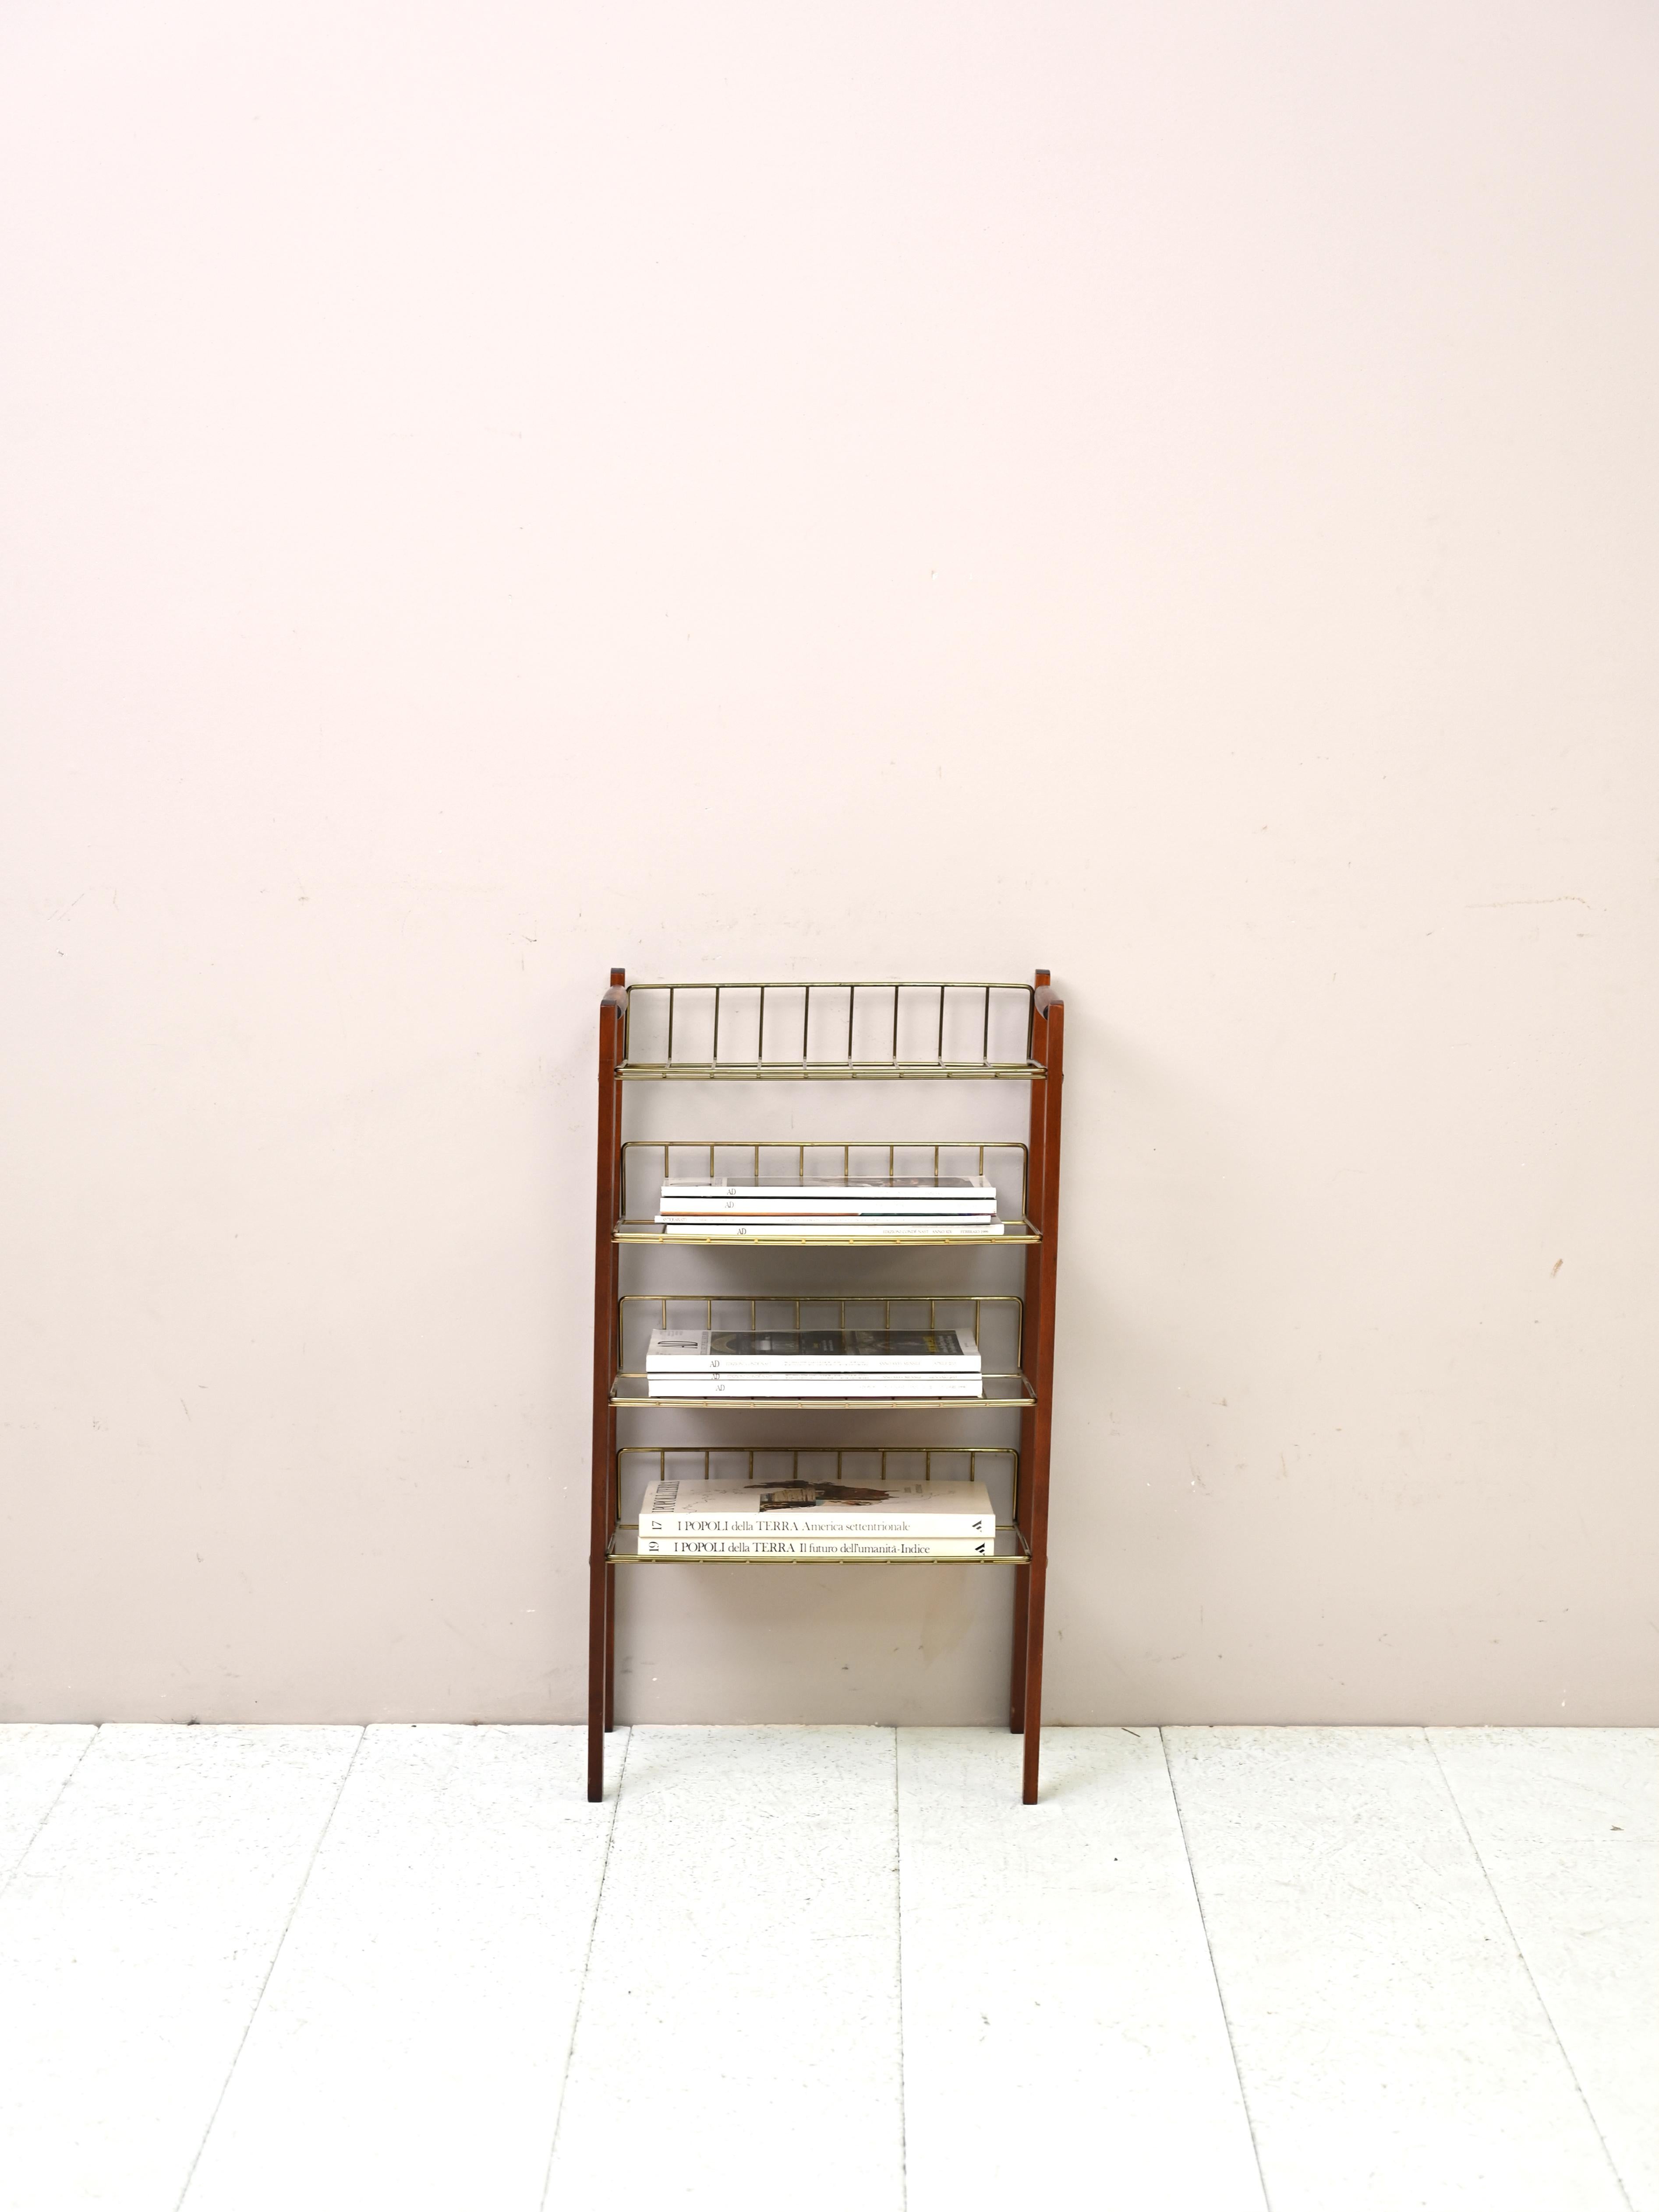 Scandinavian magazine rack with three shelves.
The frame is made of metal and teak wood.

Scandinavian original vinage manufacture from the 1950s.

Good condition. It has been restored with natural products. It may show some signs
of time.